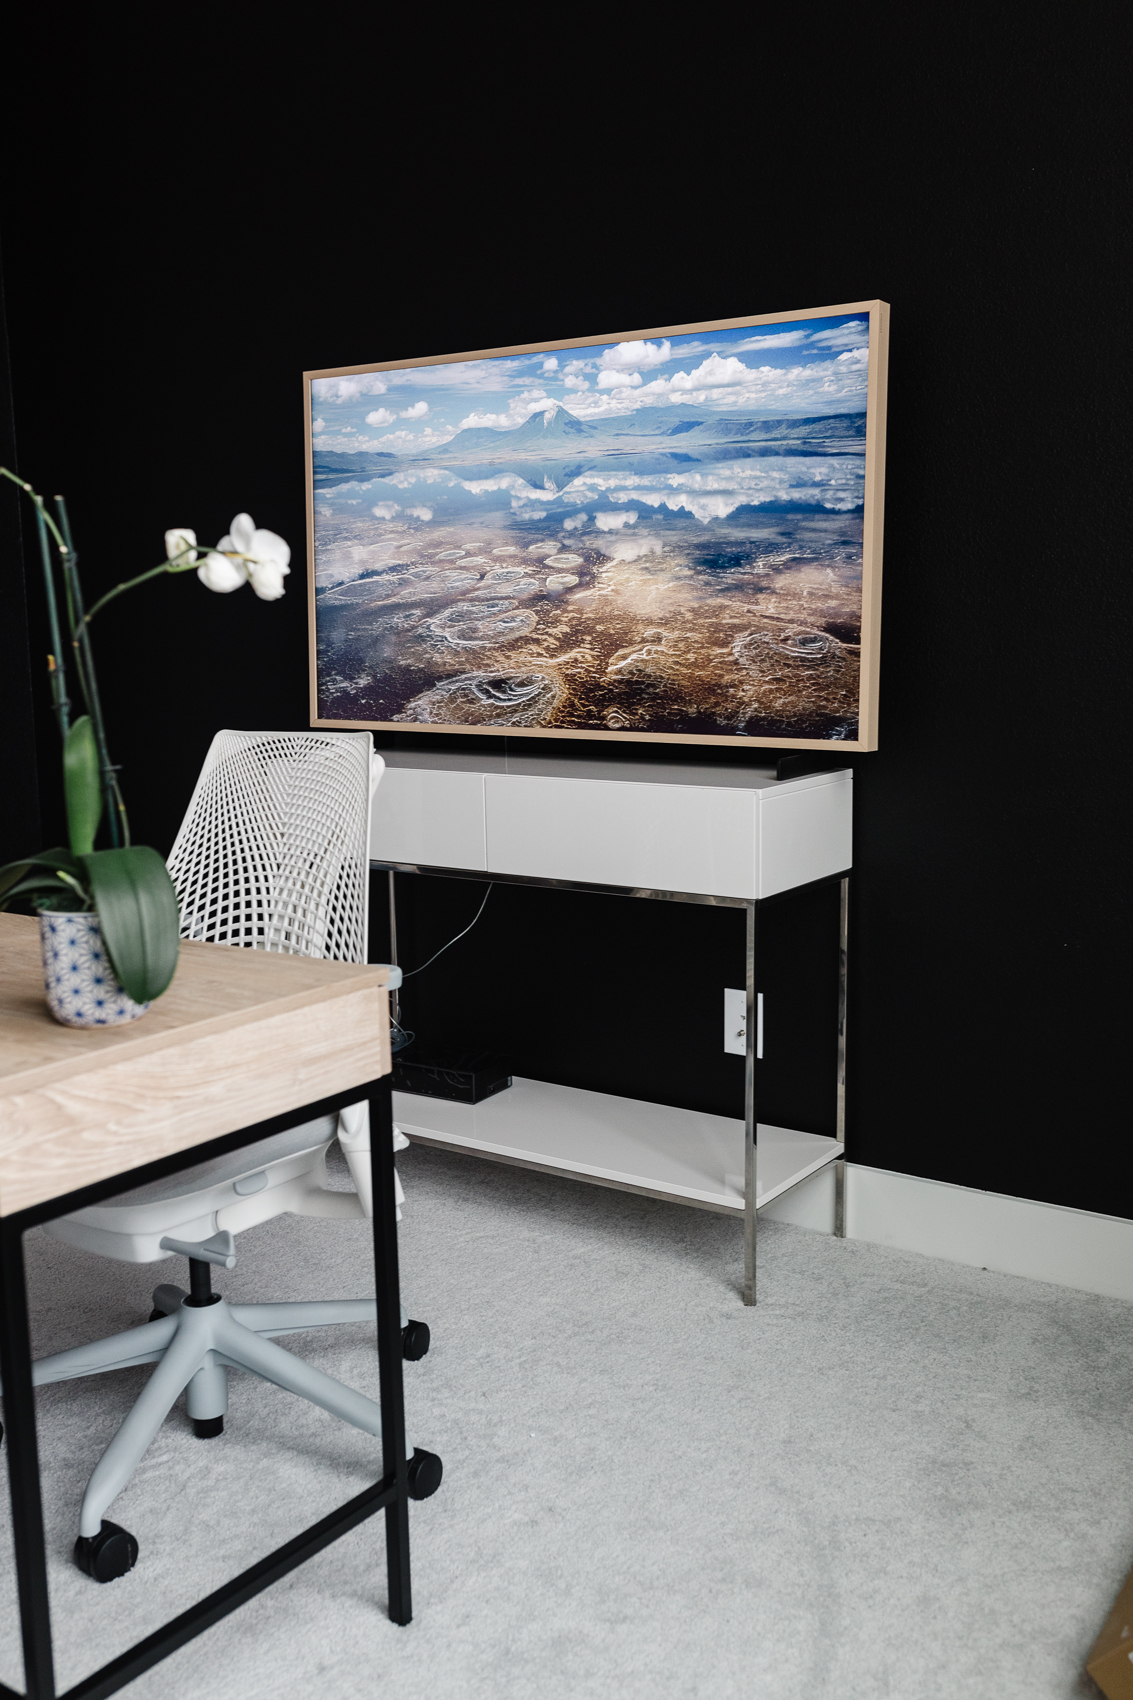 Samsung Frame 55" TV with a beige bezel in a home office painted Tricorn Black with a Herman Miller SAYL Chair